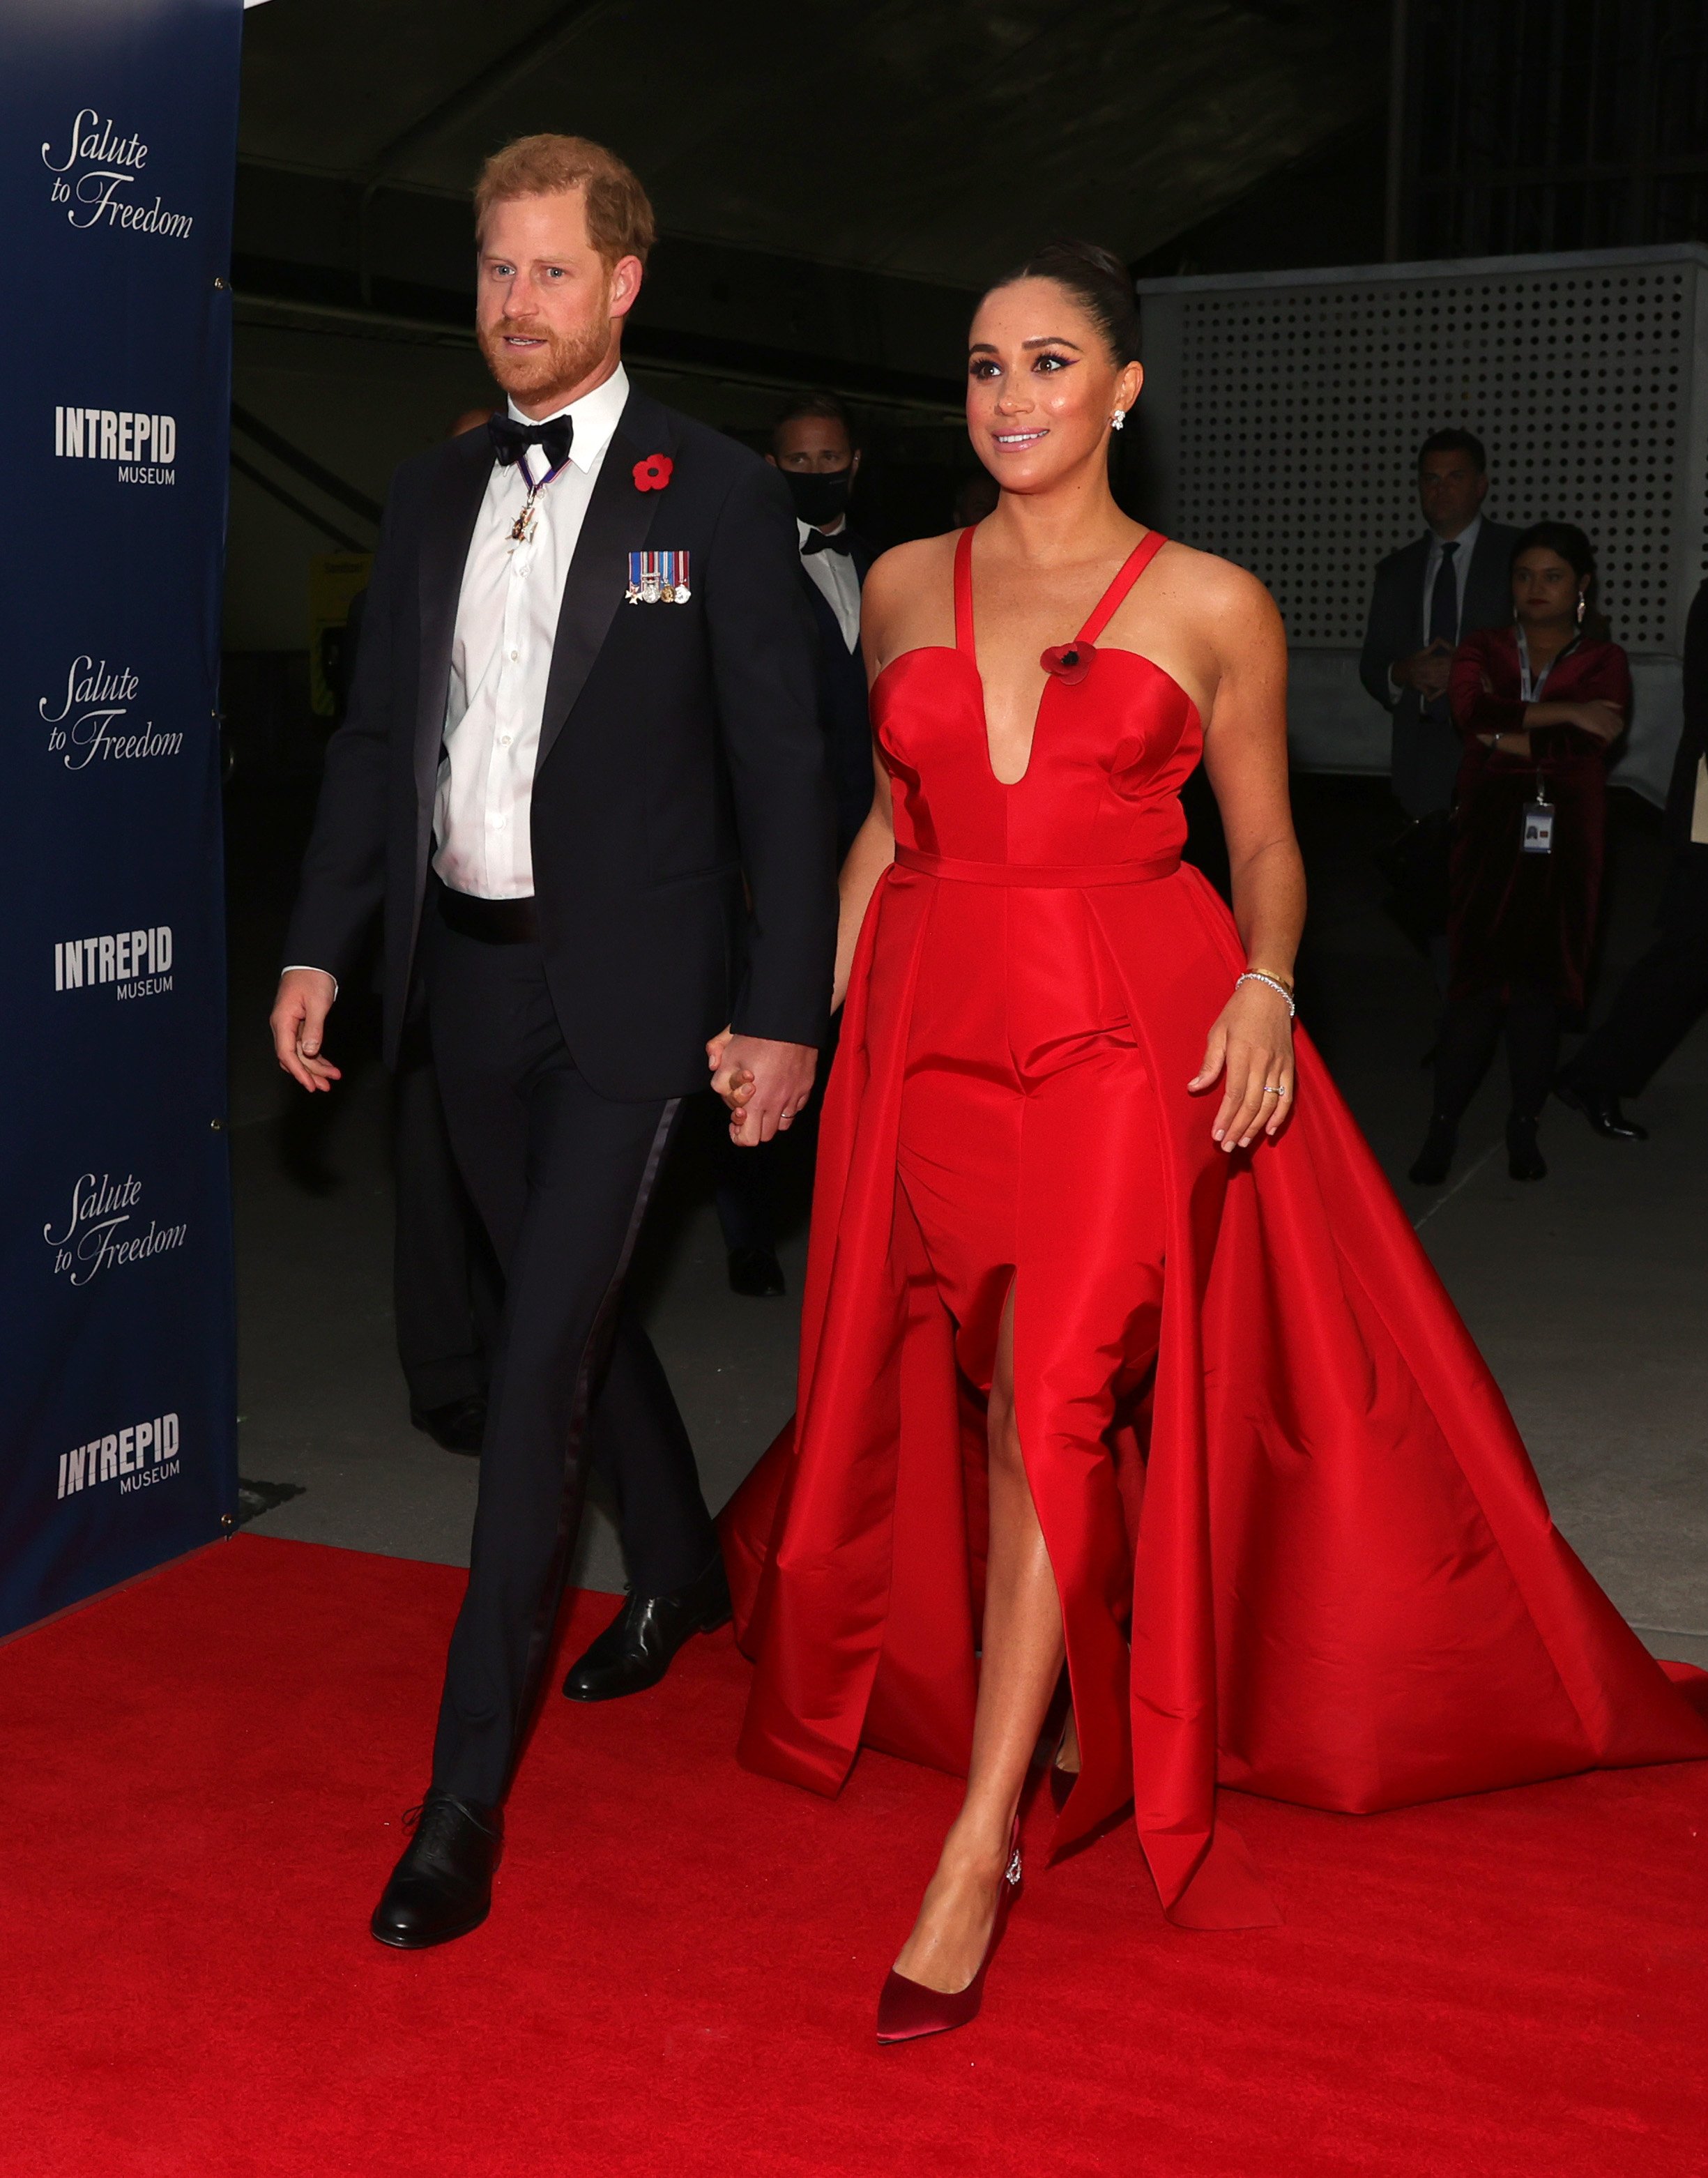 Prince Harry and Meghan Markle attending the 2021 Salute To Freedom Gala on November 10, 2021 in New York City. | Source: Getty Images